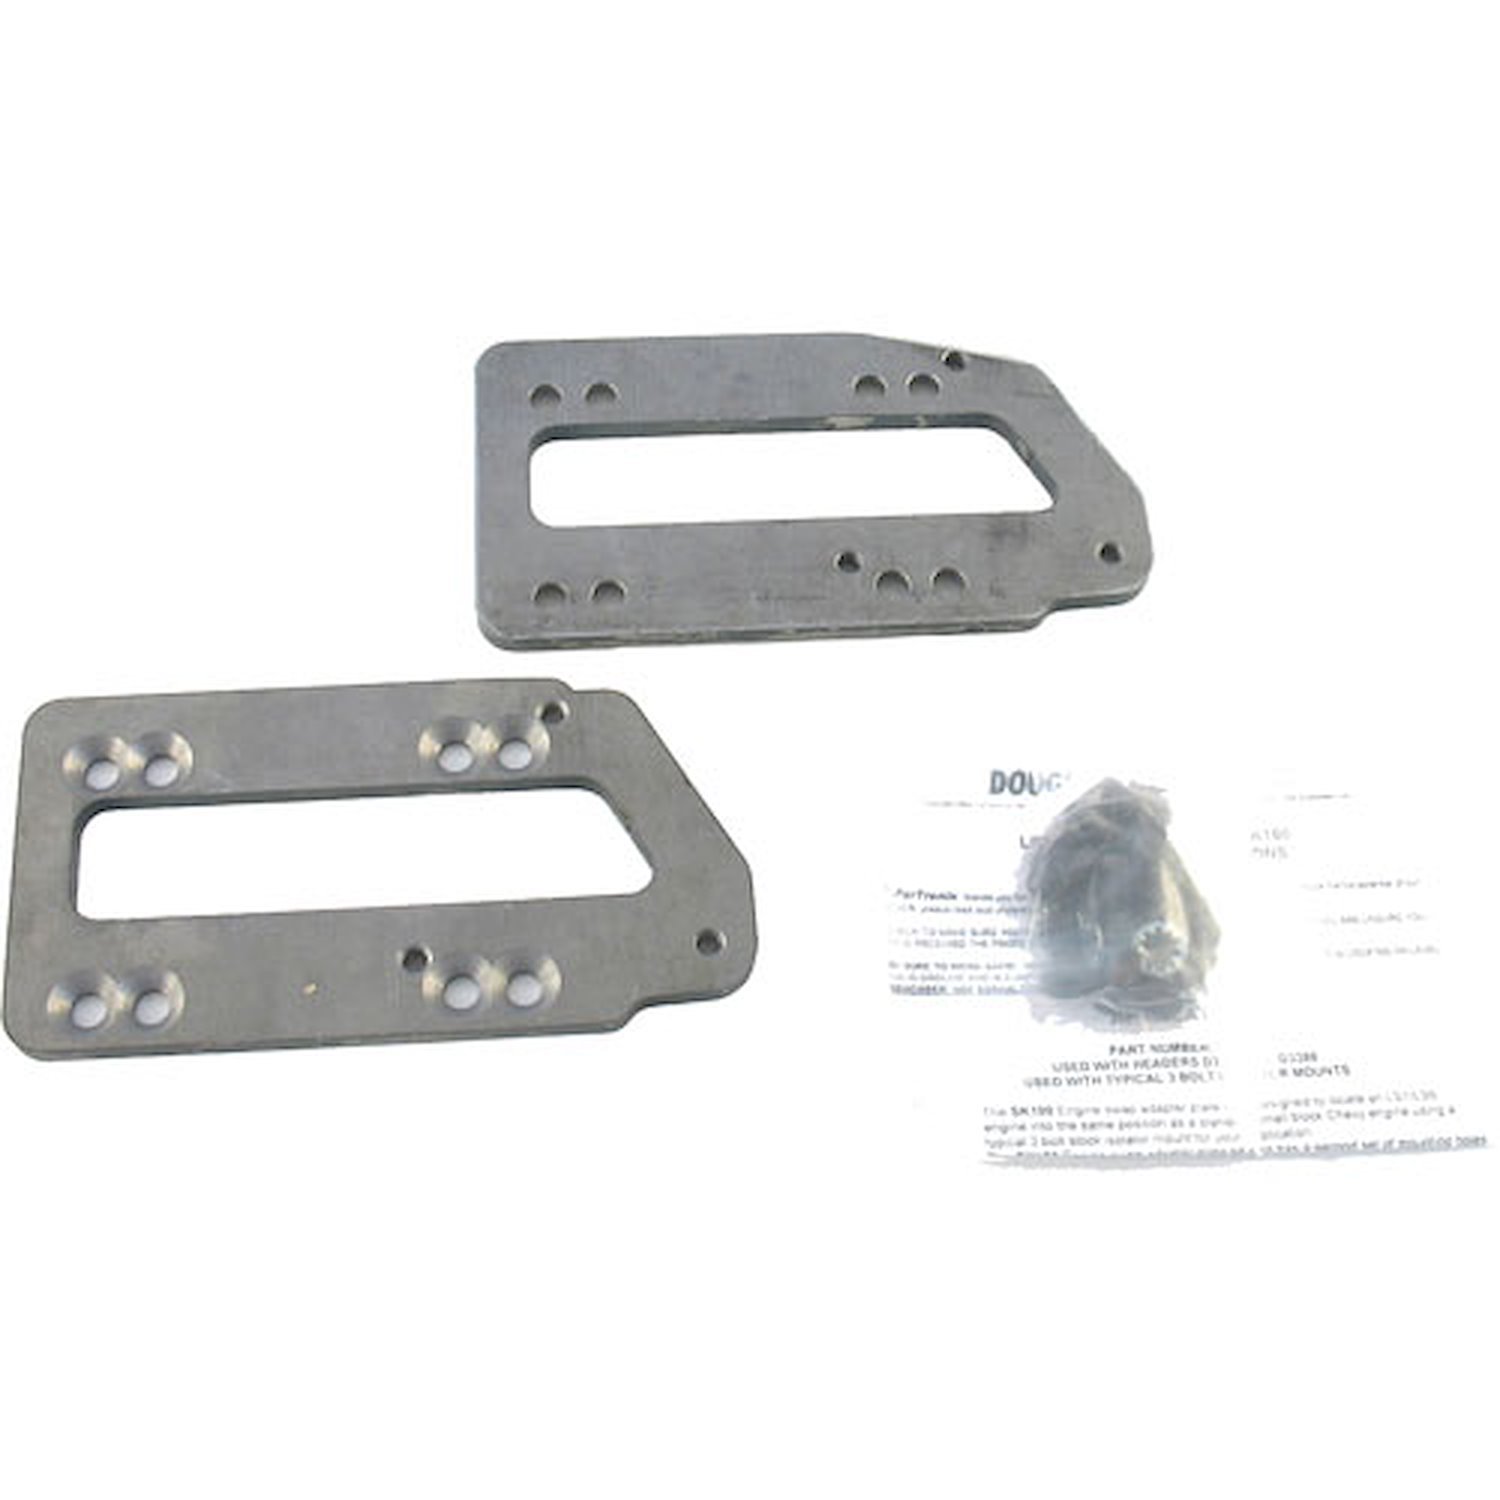 Doug's Headers SK100: Motor Mount Adapter Plate Kit 1964-1974 Buick/Chevy/ Pontiac LS1 4.8/5.3/6.0L - JEGS